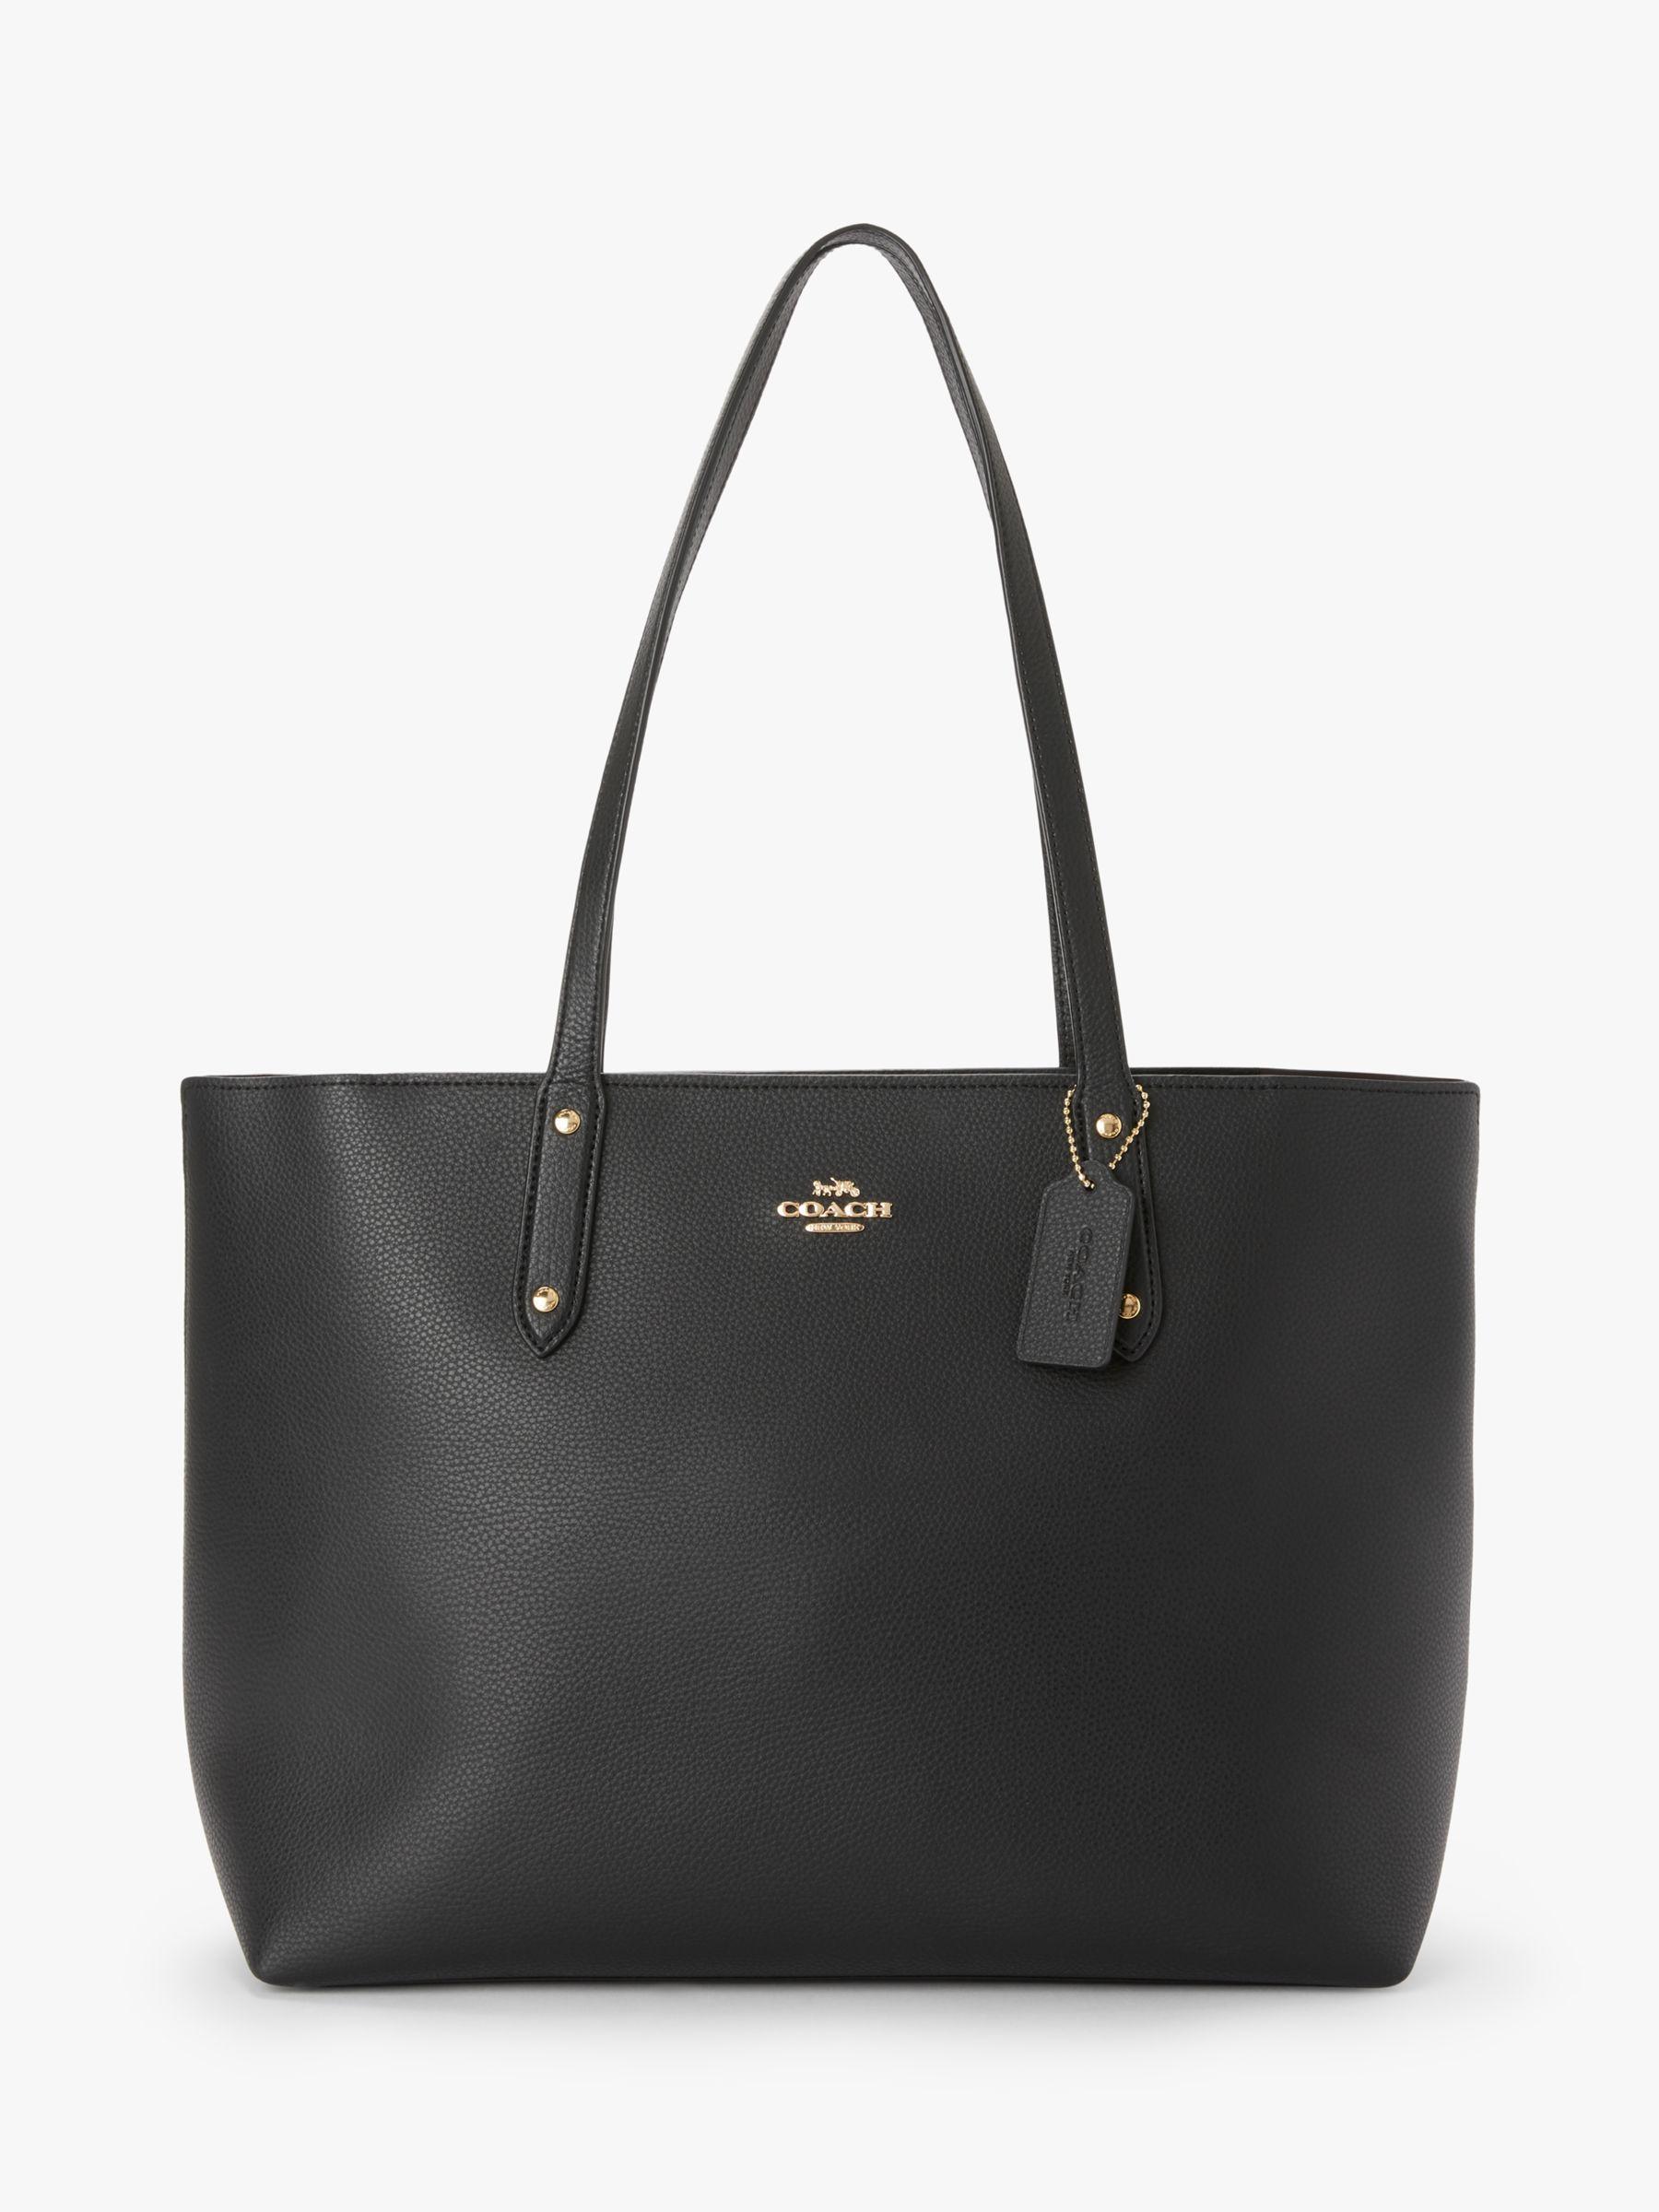 COACH Central Leather Zip Top Tote Bag in Black | Lyst UK